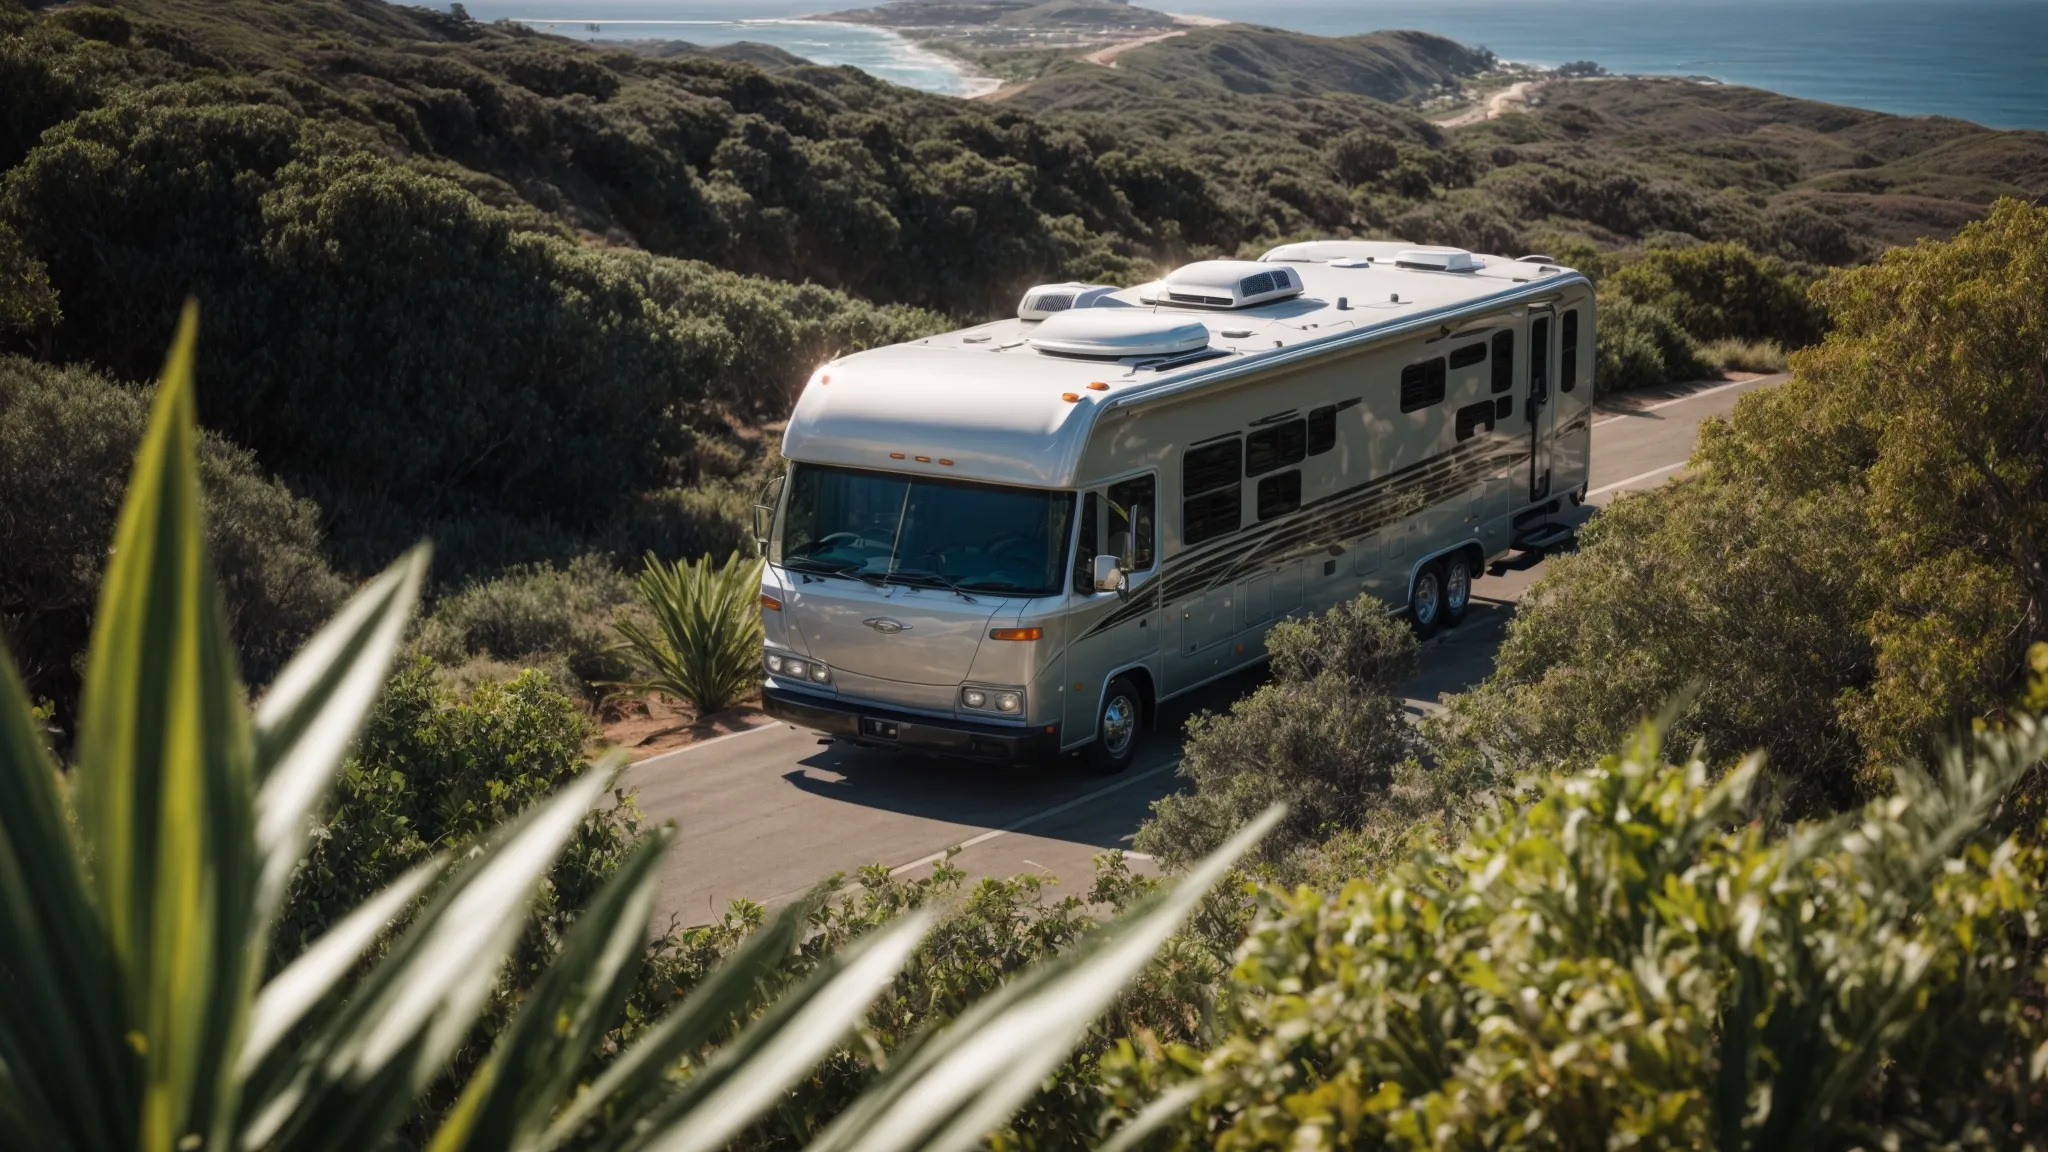 an rv parked amidst lush greenery with a view of the tranquil san diego coastline under a clear blue sky.